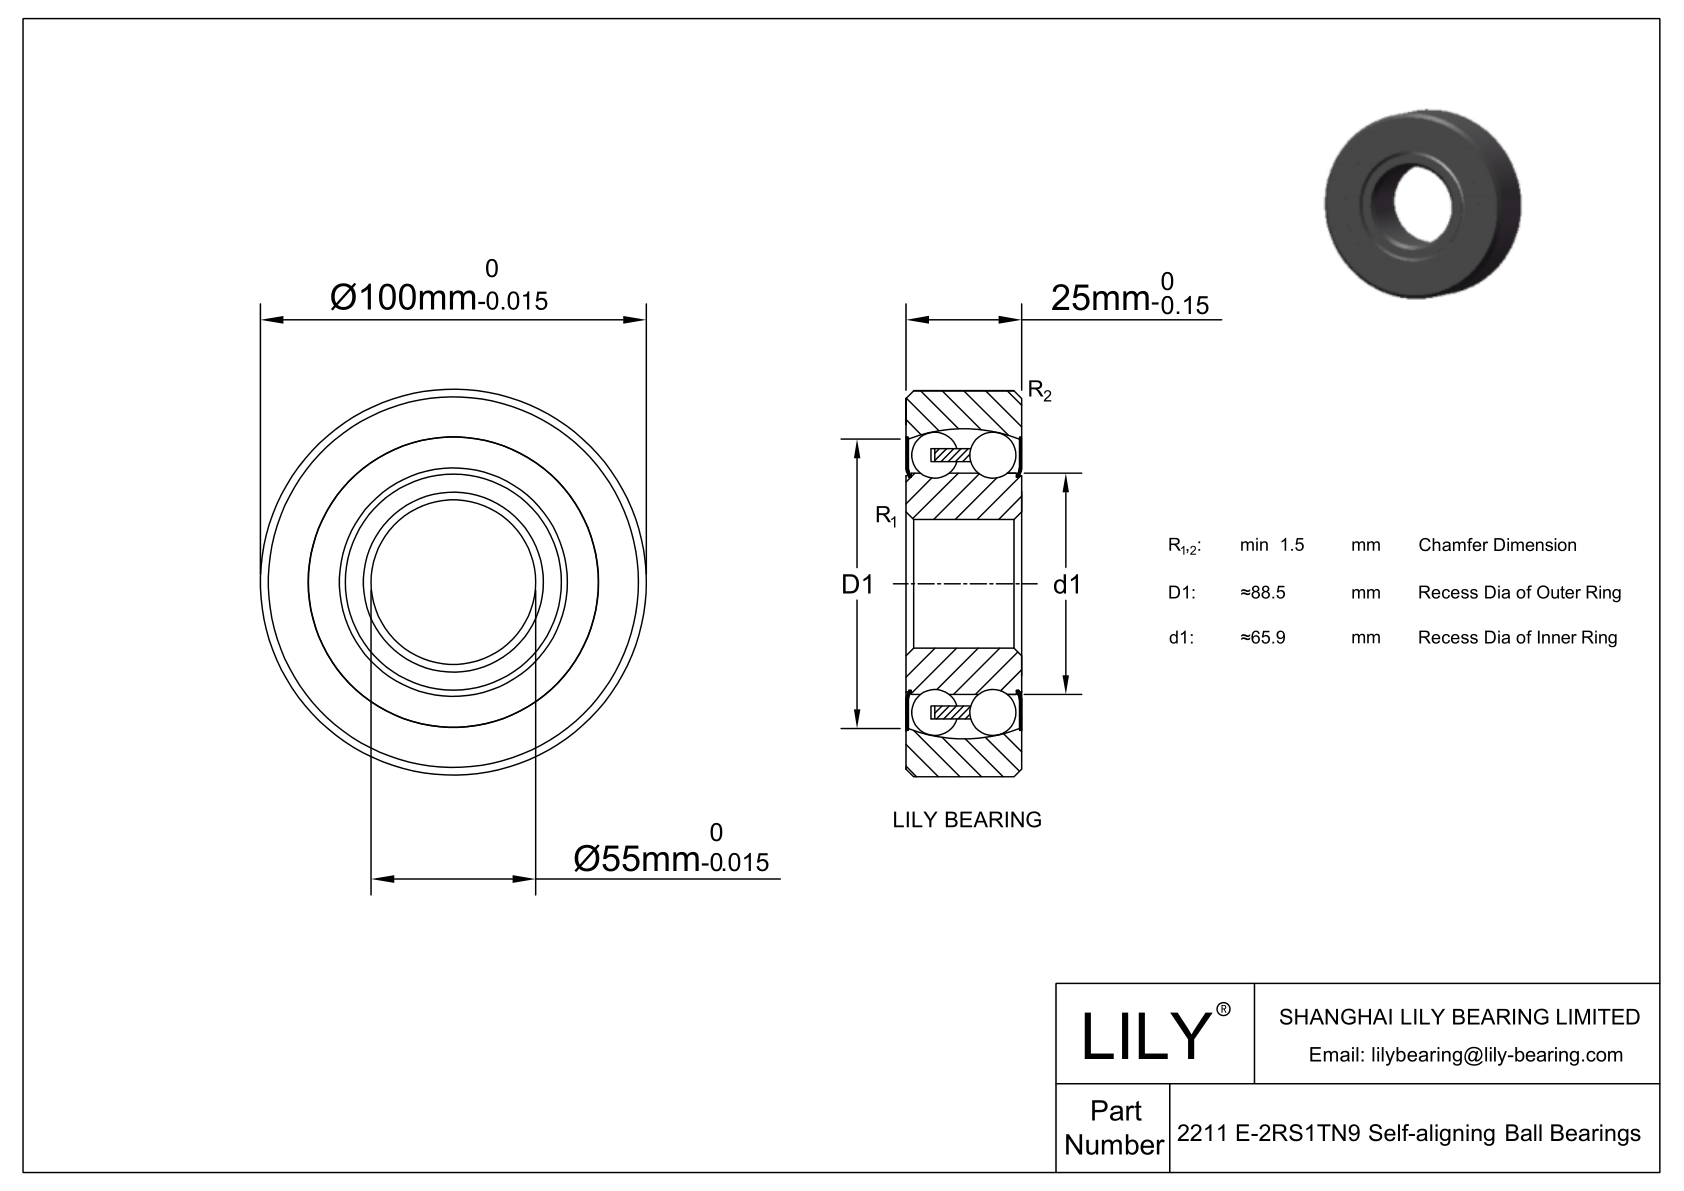 S2211 E-2RS1TN9 Stainless Steel Self Aligning Ball Bearings cad drawing